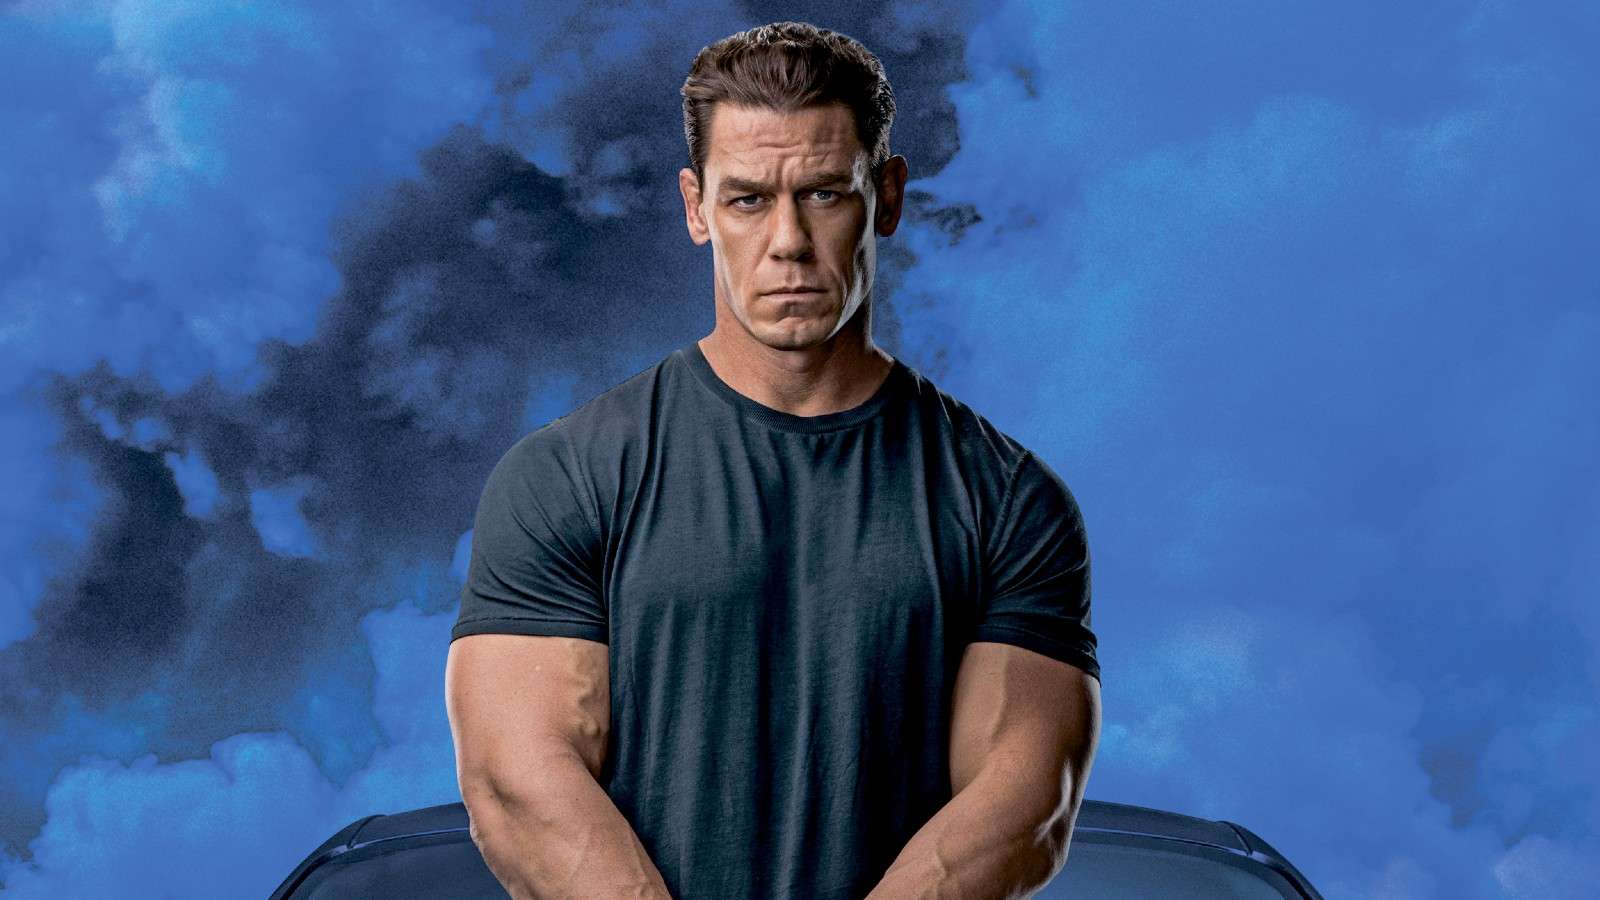 John Cena on a Fast and Furious poster